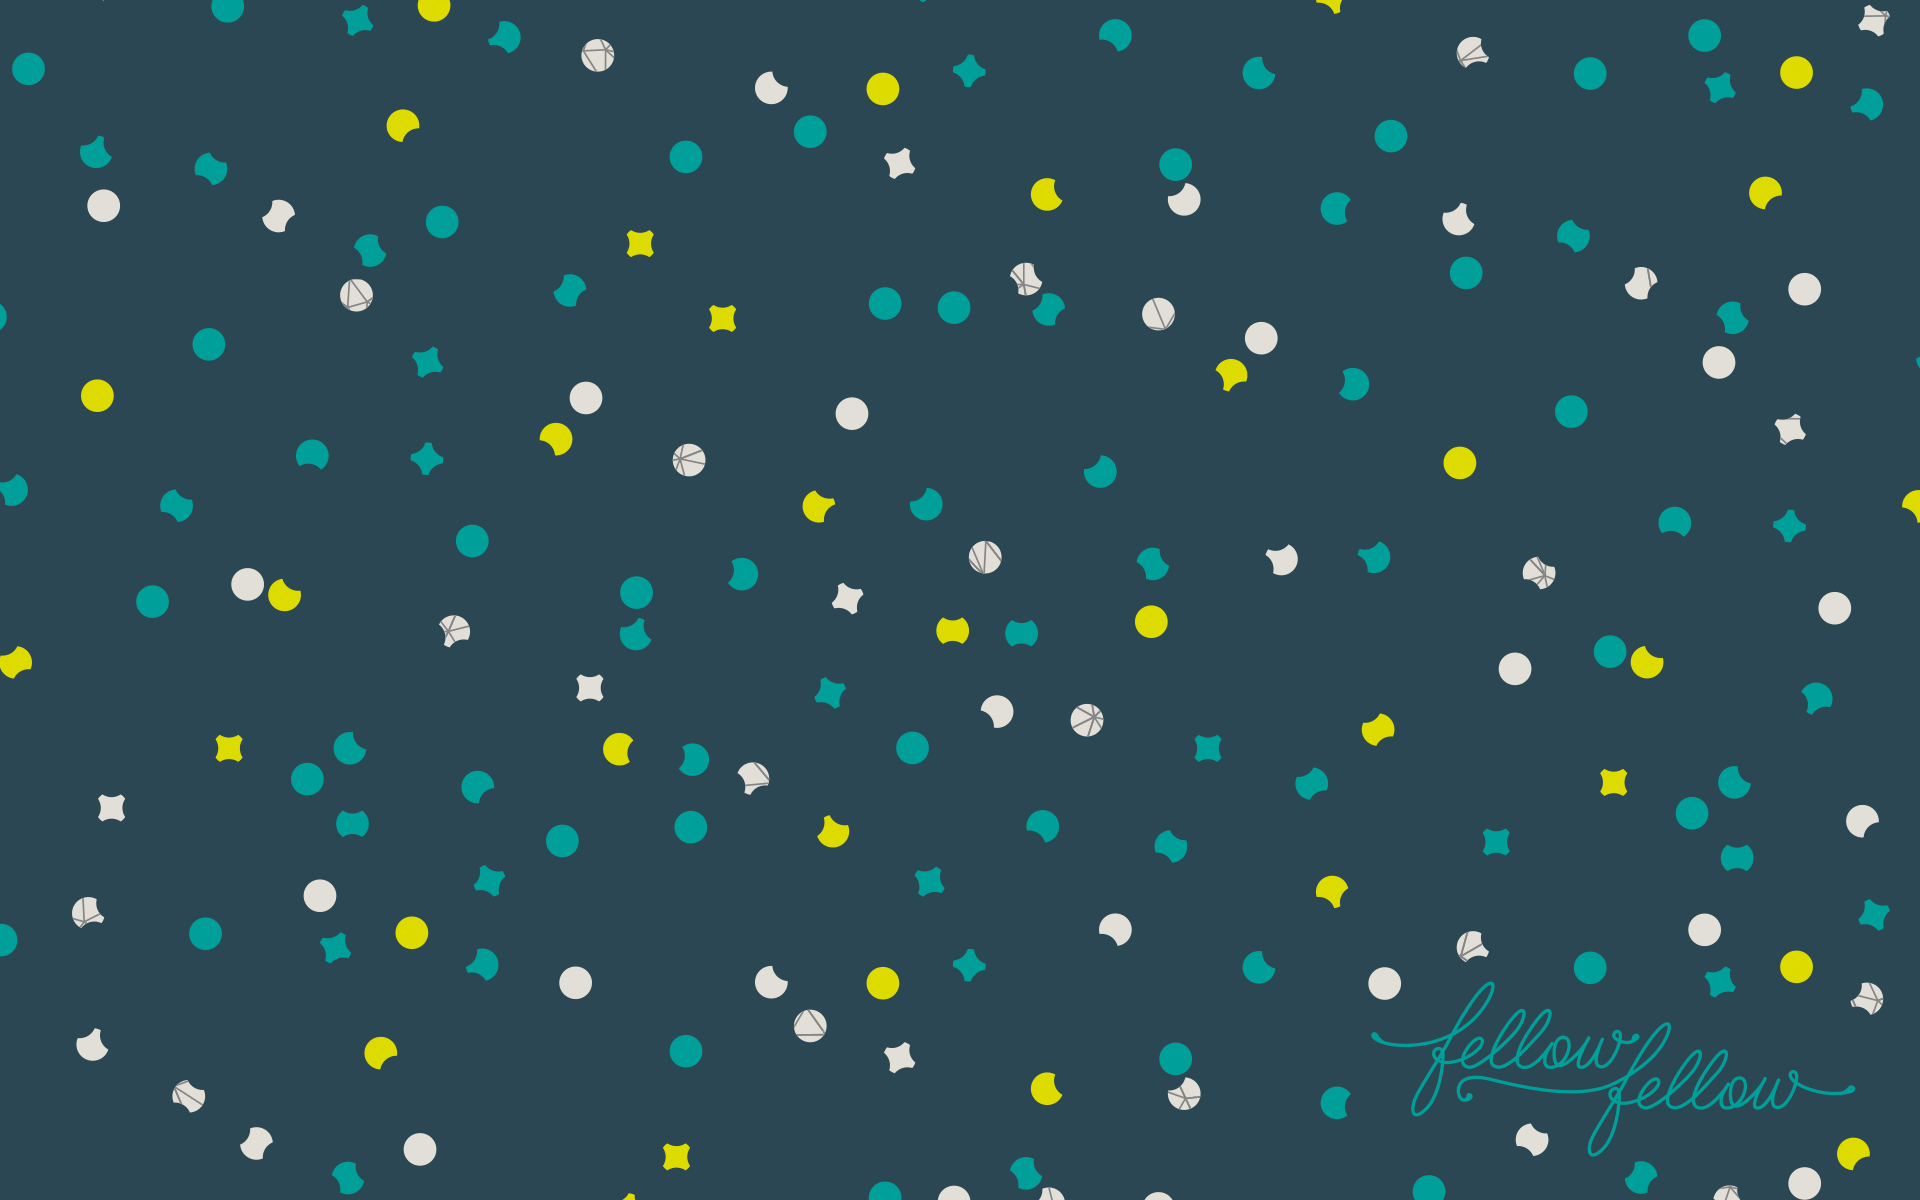 Teal Backgrounds download free Wallpapers, Backgrounds, Images